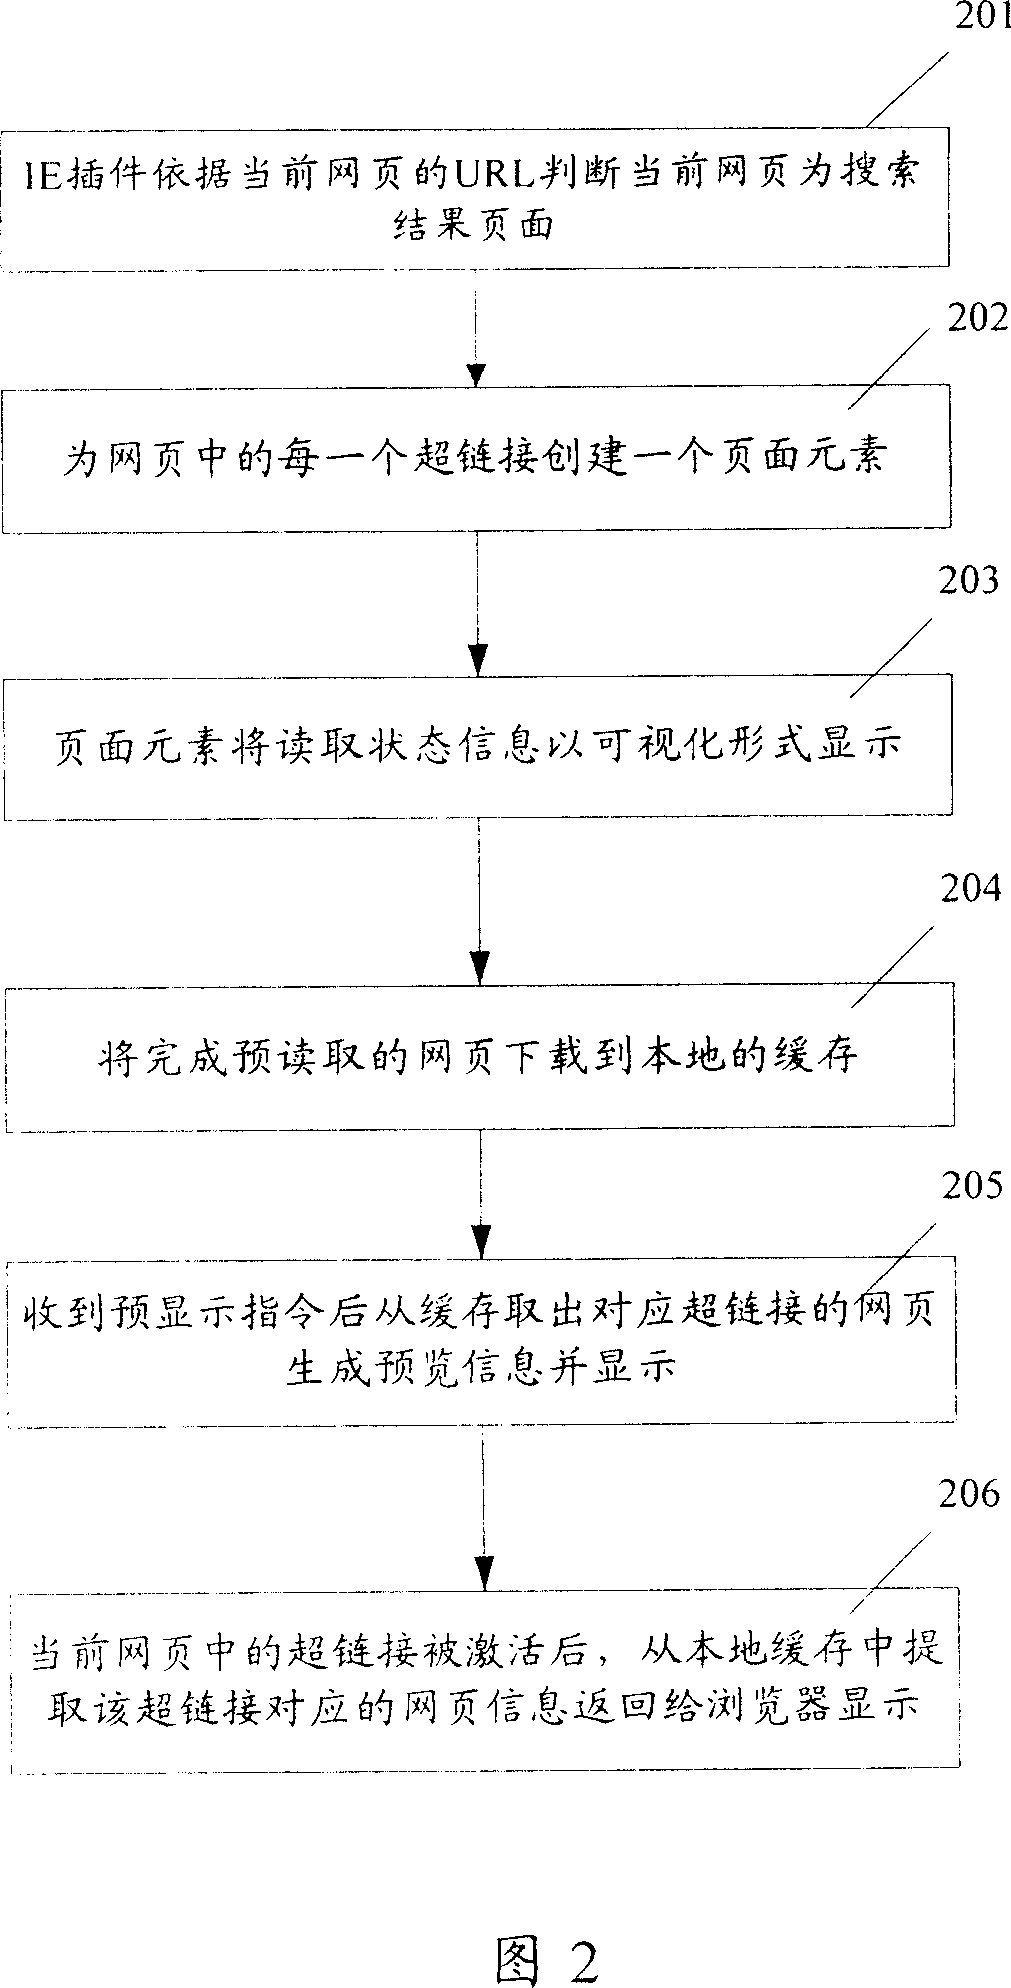 Apparatus and method for accelerating browser webpage display